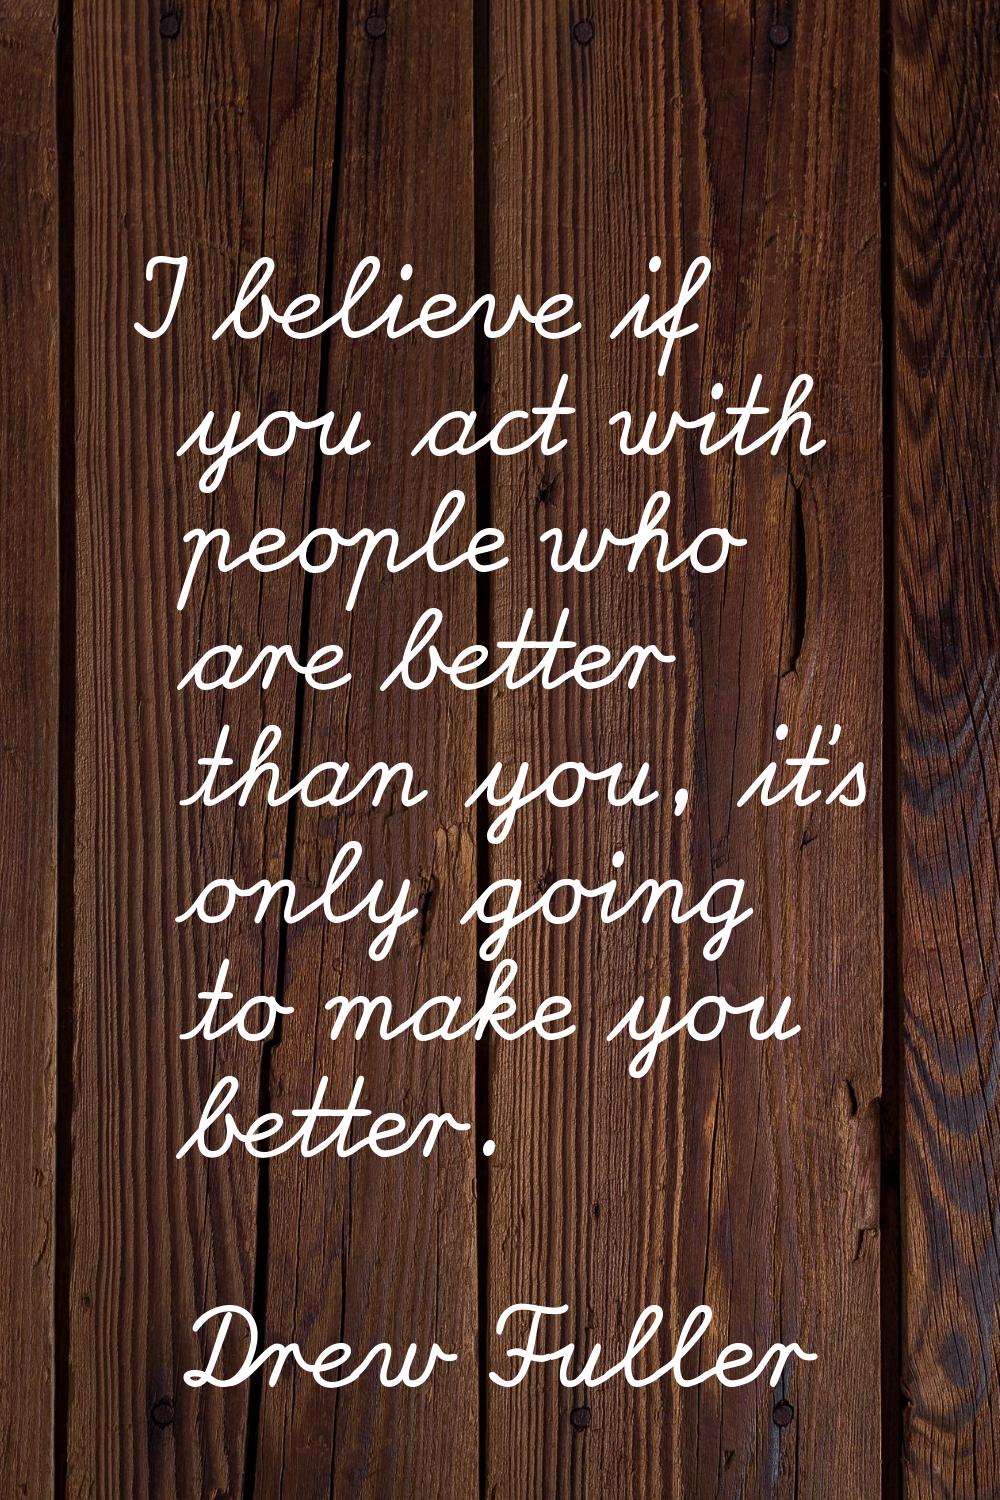 I believe if you act with people who are better than you, it's only going to make you better.